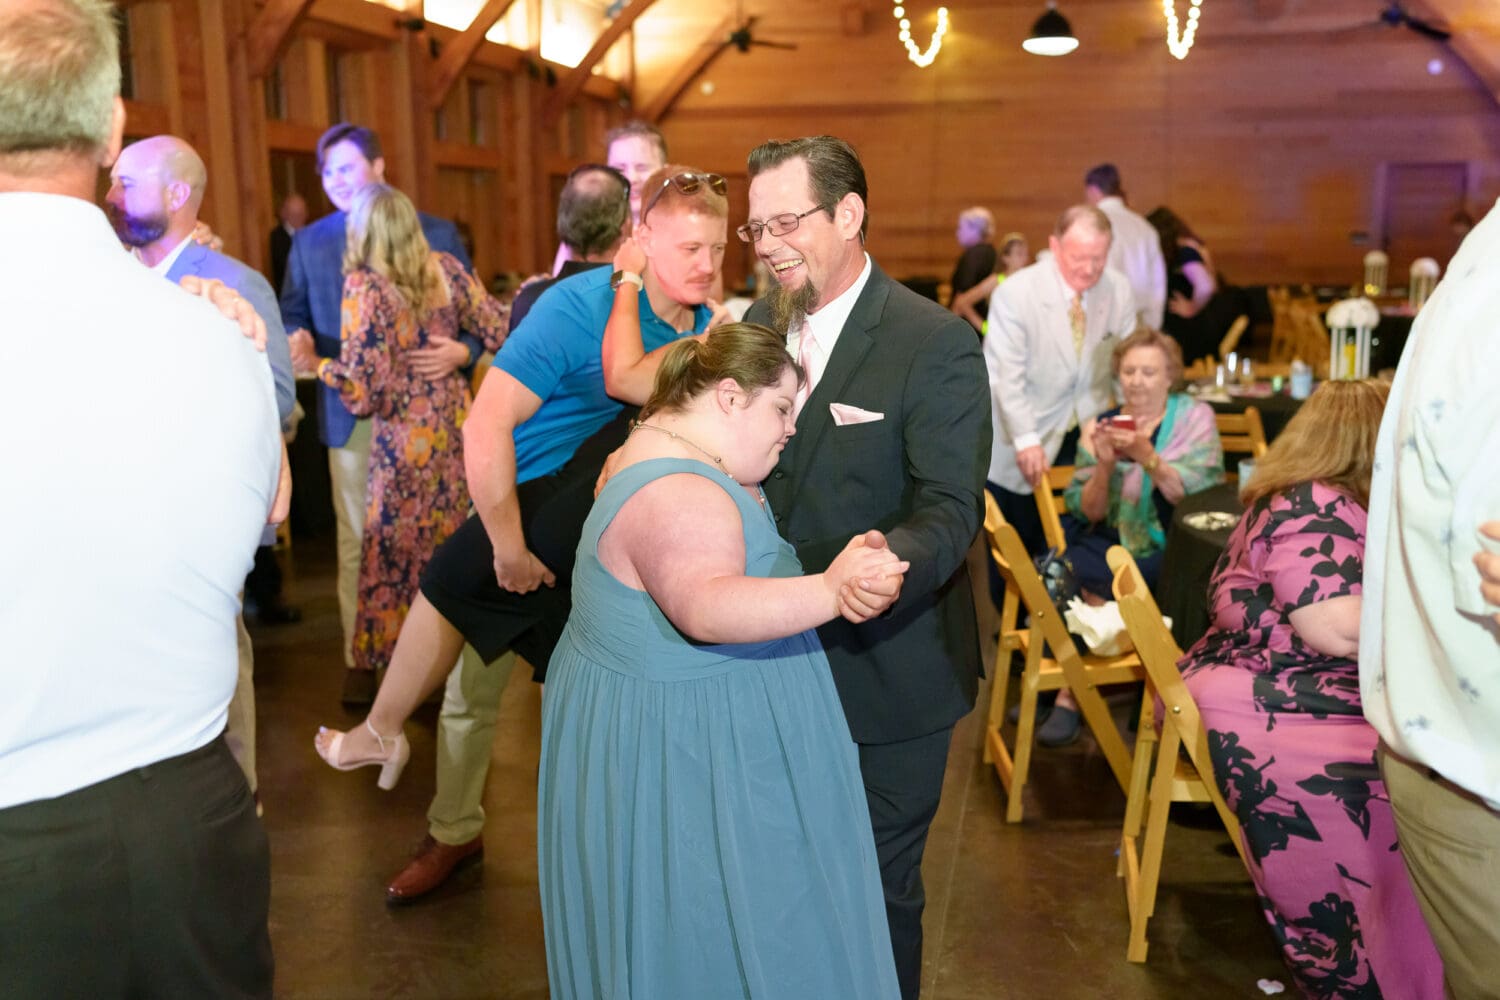 Bride's father and sister dancing - The Pavilion at Pepper Plantation